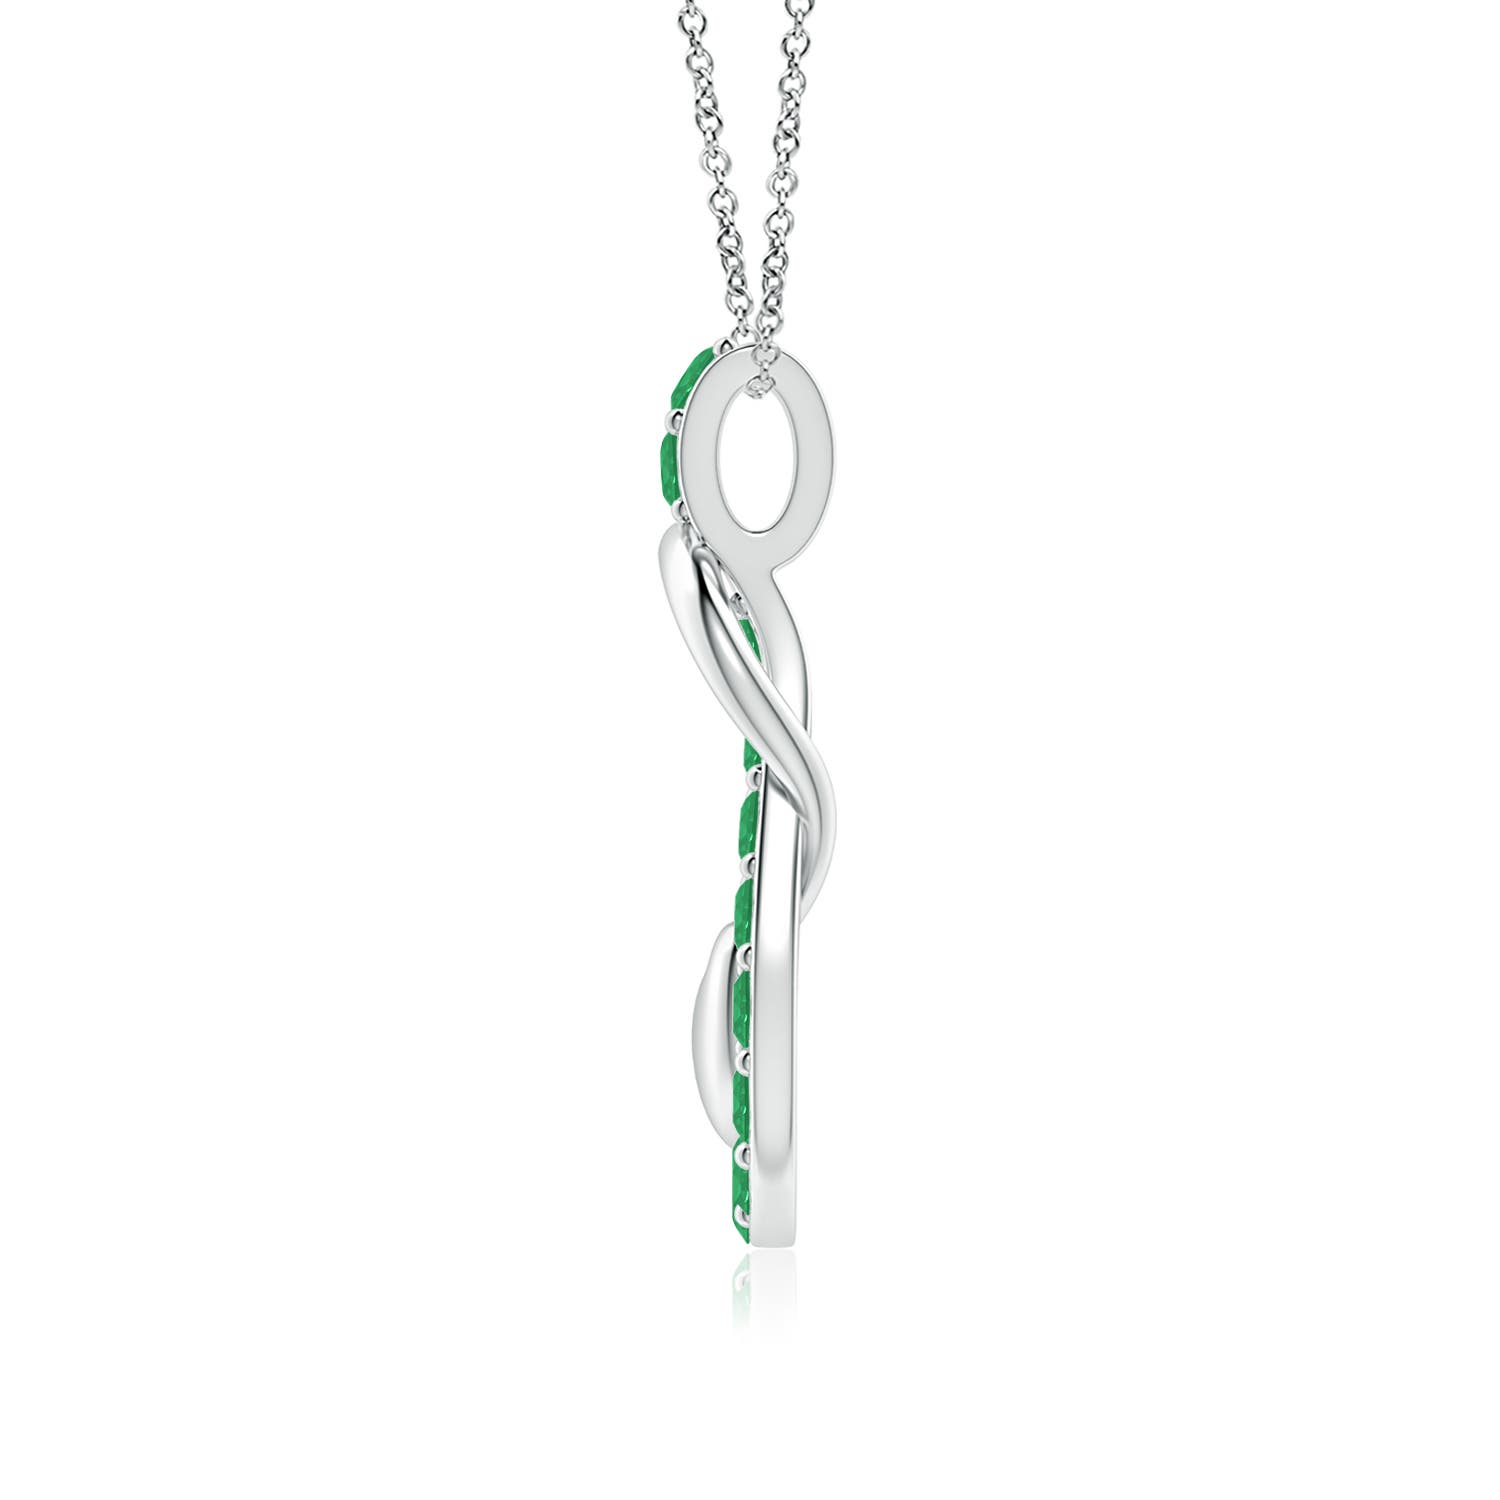 A - Emerald / 1.9 CT / 18 KT White Gold